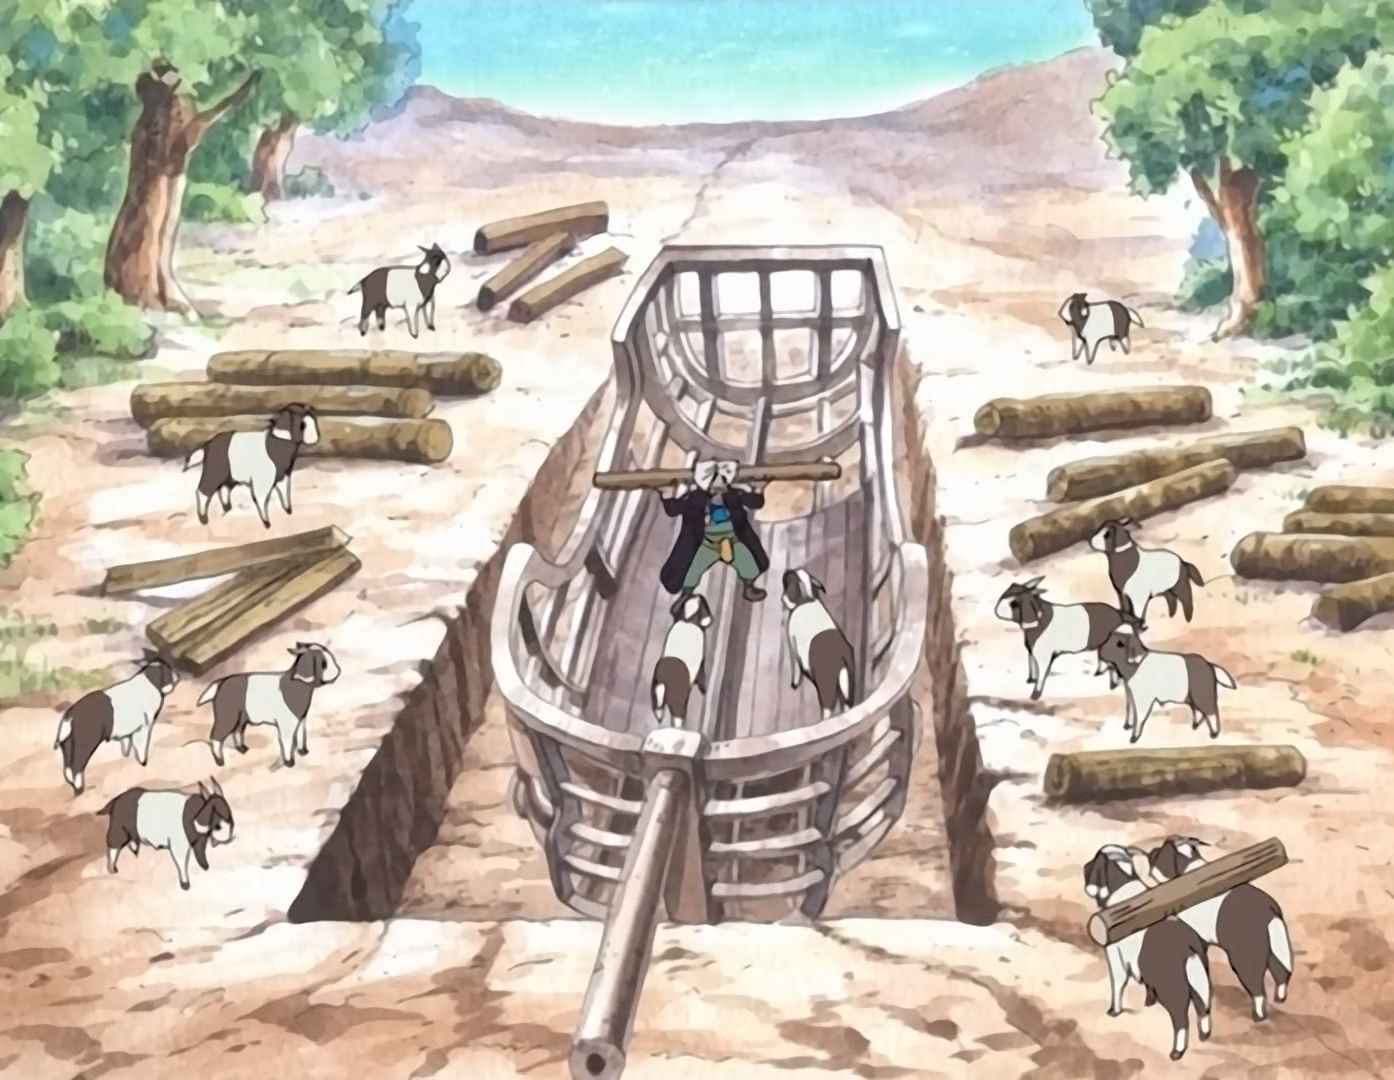 One Piece Zenny builds his ship with the help of his goats